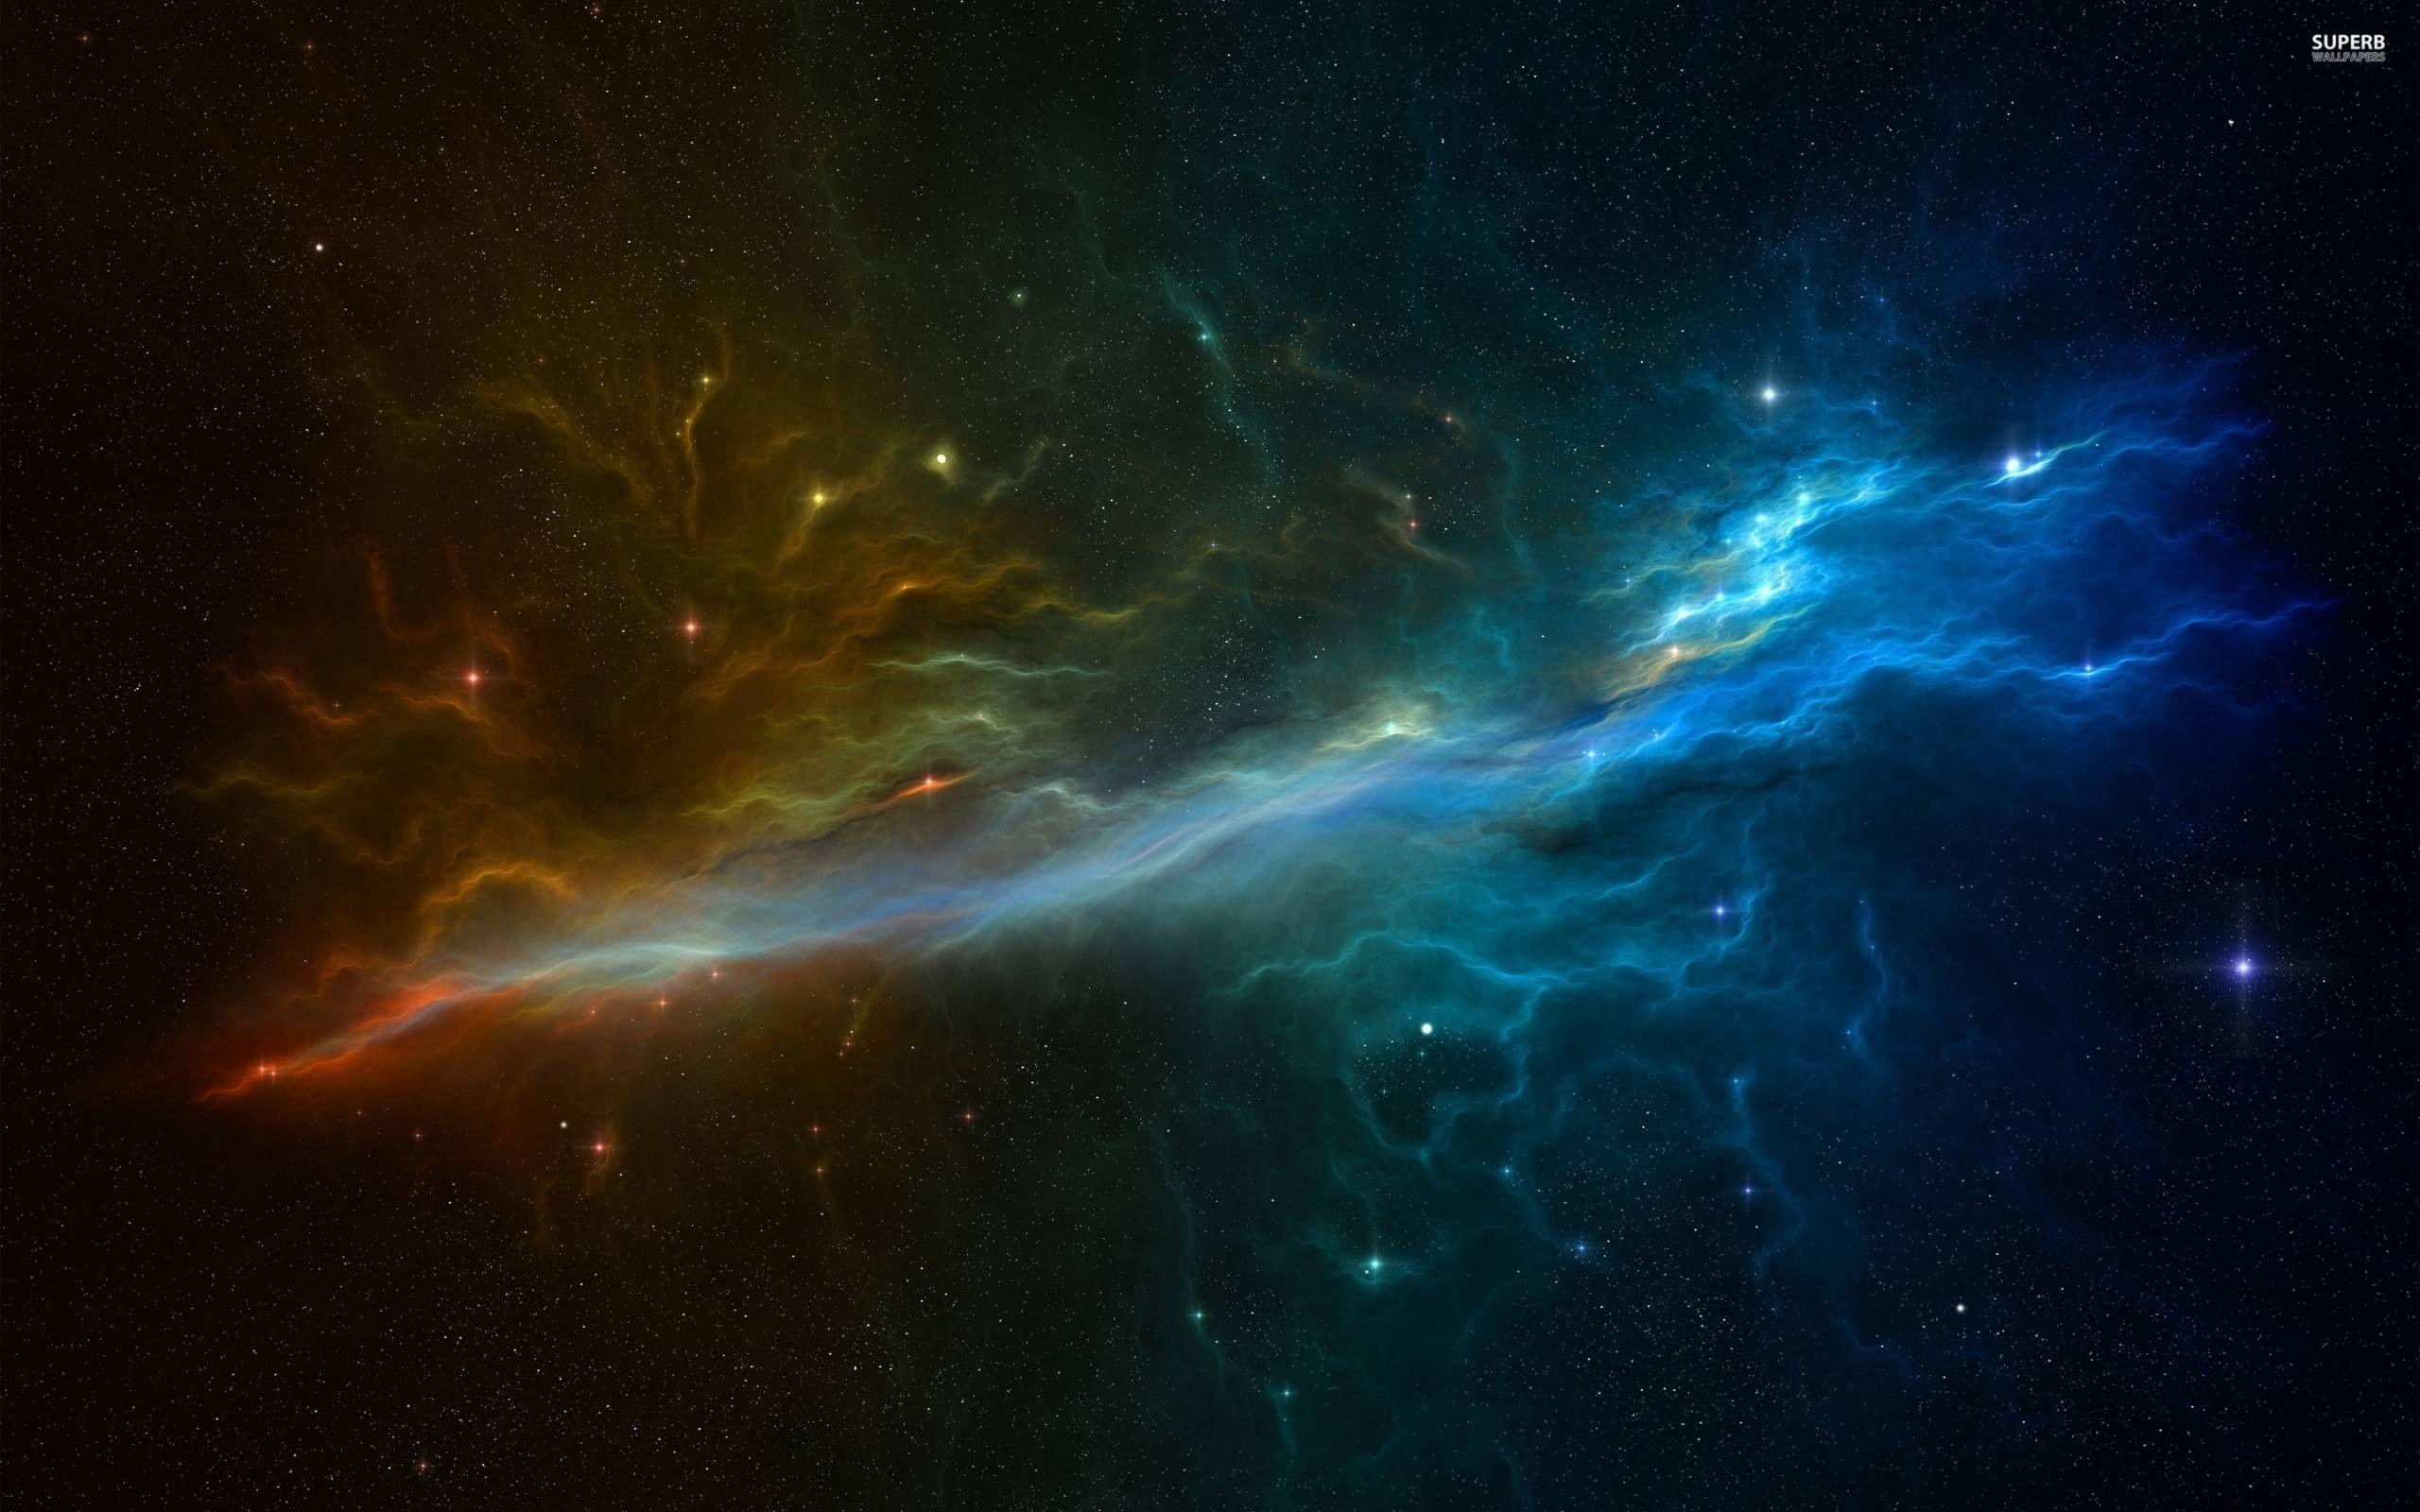 Cool Space wallpaperDownload free amazing High Resolution